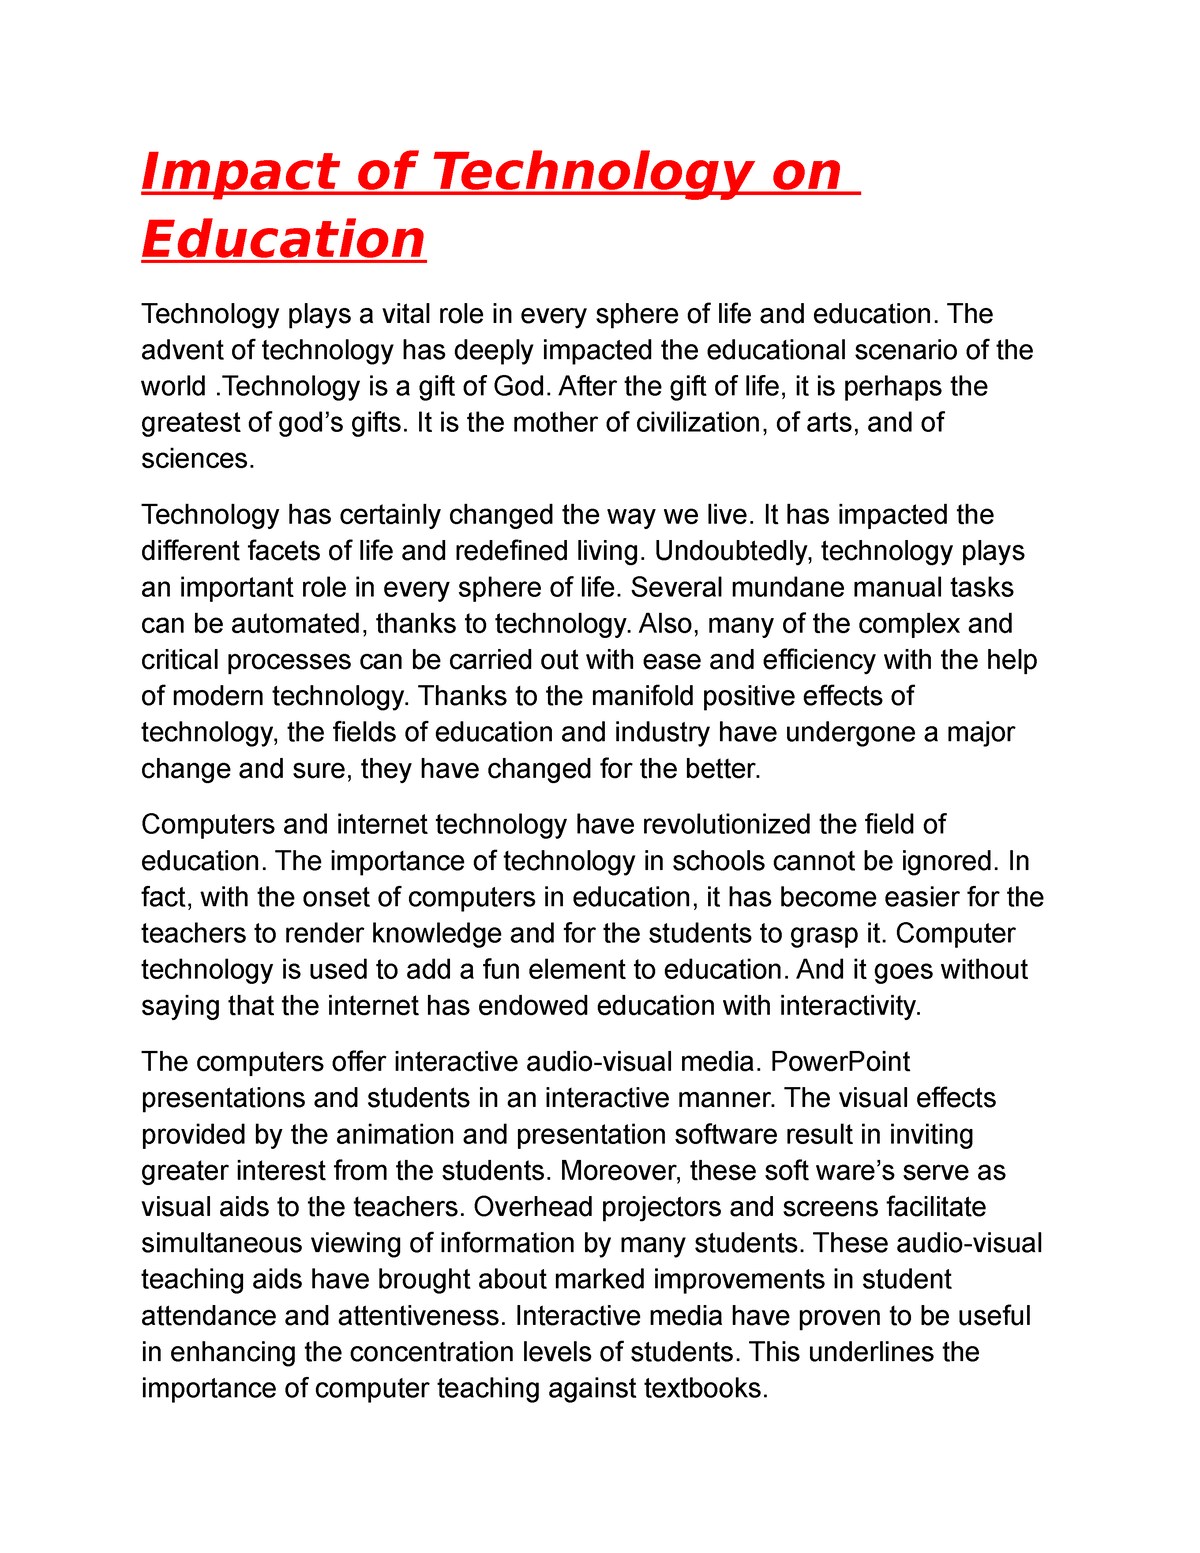 the impact of technology on education essay